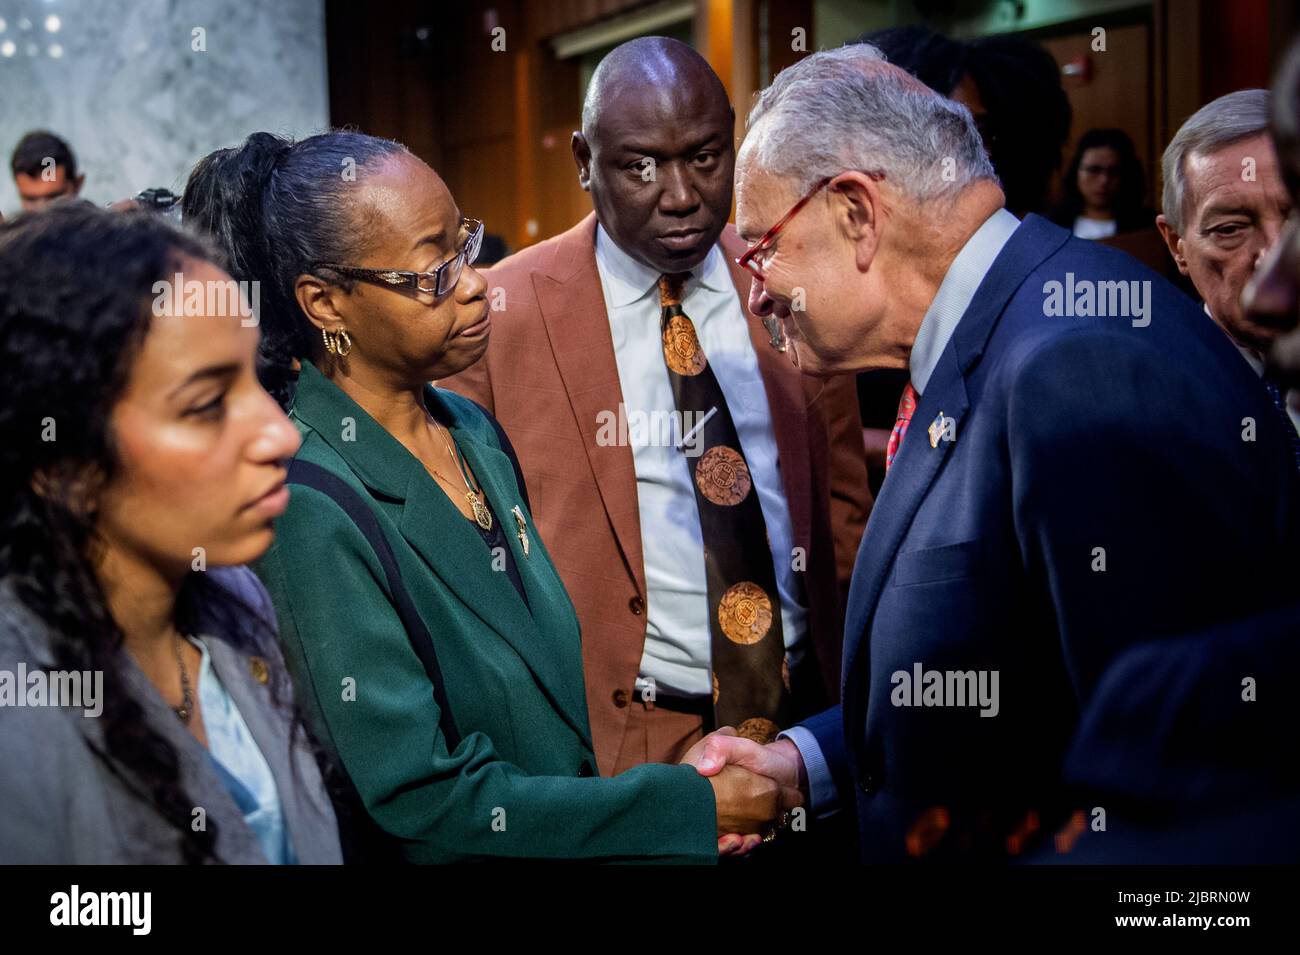 Washington, United States Of America. 07th June, 2022. Kimberly Salter, left, wife of Tops Security Guard Aaron Salter, Jr., who died in the Buffalo, New York, Tops supermarket mass shooting implores for United States Senate Majority Leader Chuck Schumer (Democrat of New York), right, to “do something”, following a Senate Committee on the Judiciary hearing to examine domestic terrorism threat after the Buffalo attack, in the Hart Senate Office Building in Washington, DC, Tuesday, June 7, 2022. Credit: Rod Lamkey/CNP/Sipa USA Credit: Sipa USA/Alamy Live News Stock Photo